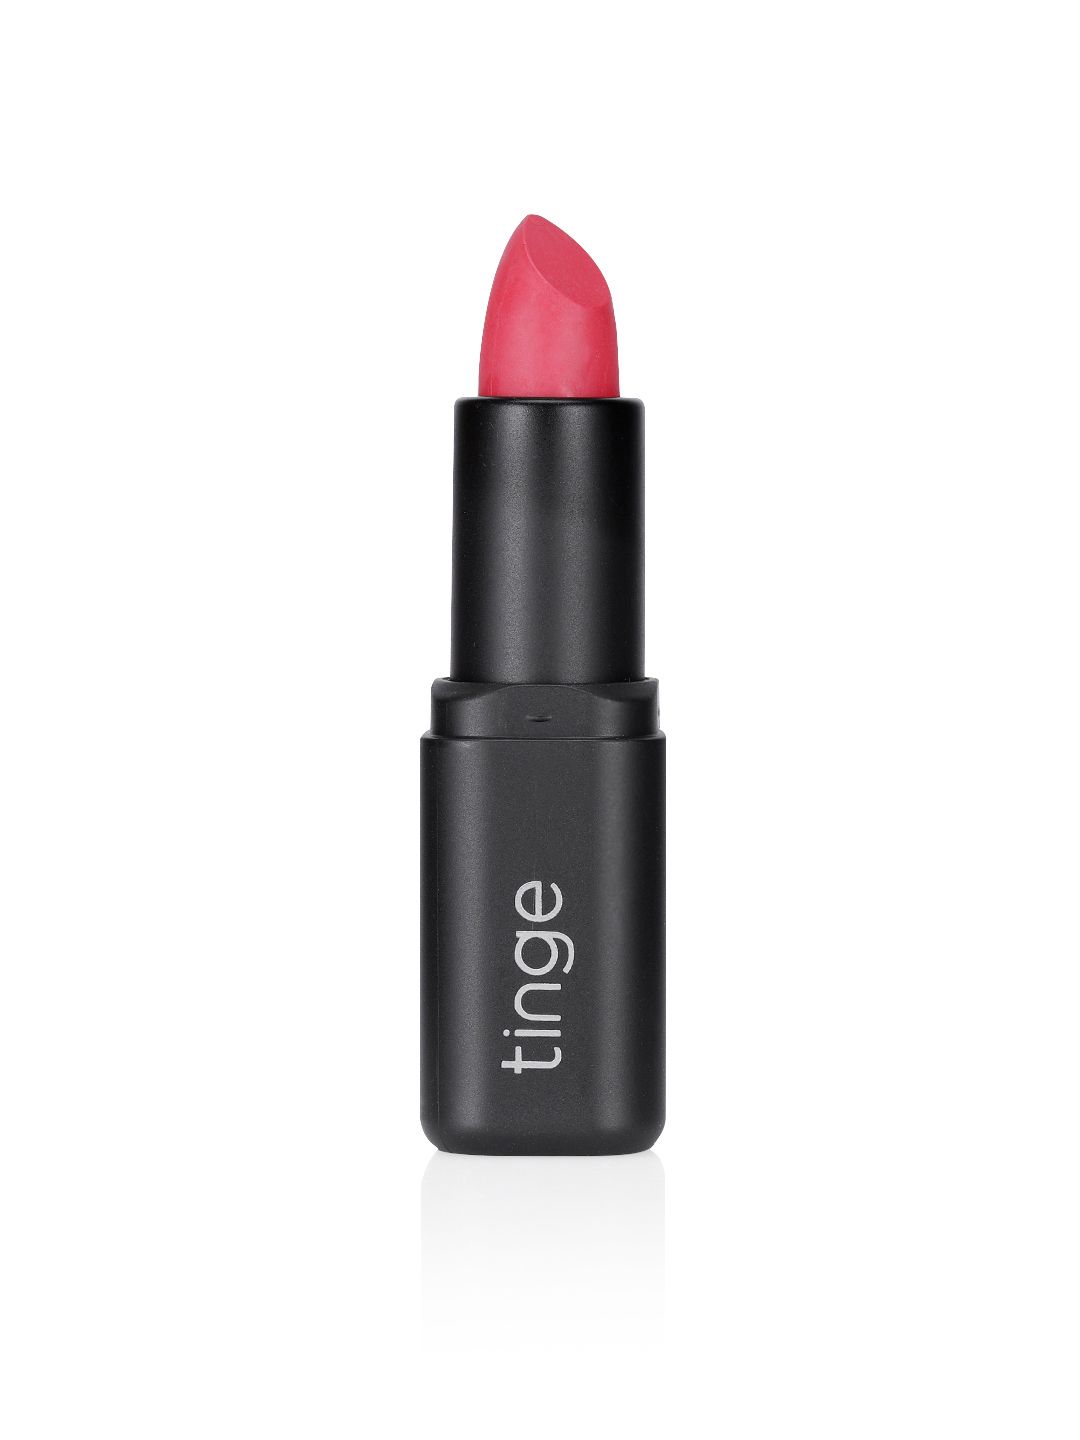 tinge Standout Pink Blogger's Delight Wax Lipstick Price in India